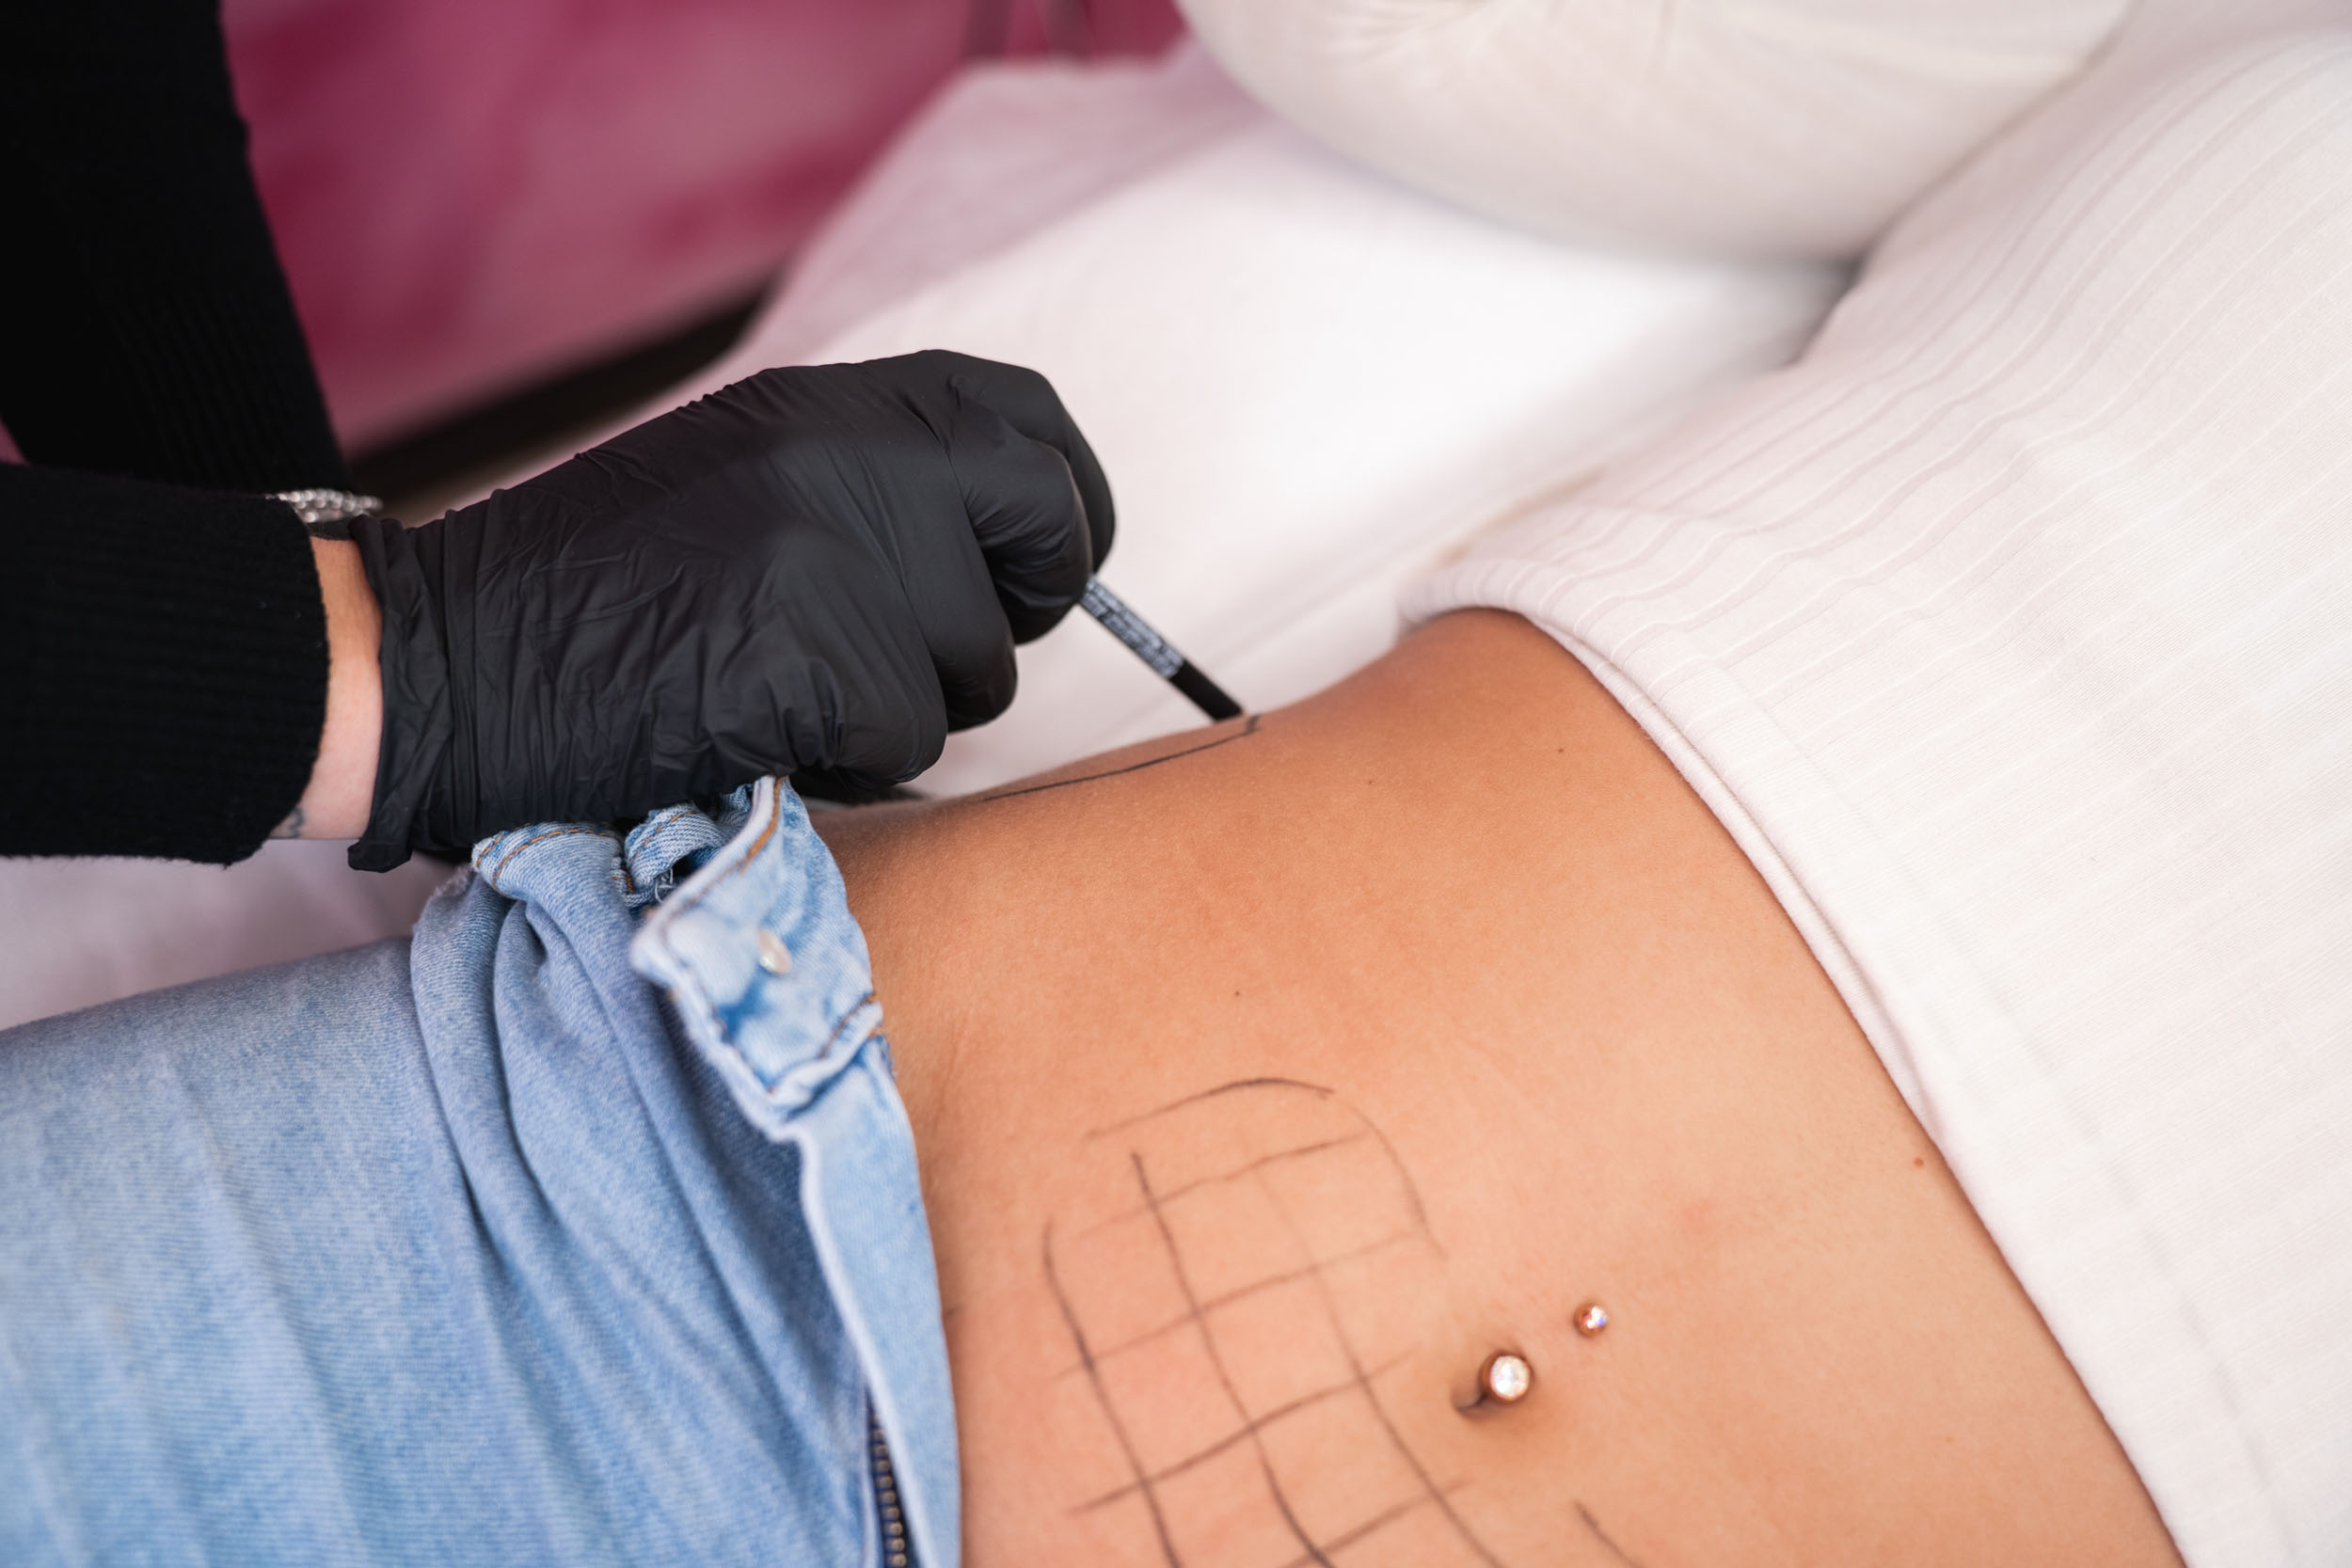 Lipo injections at FillerHouse